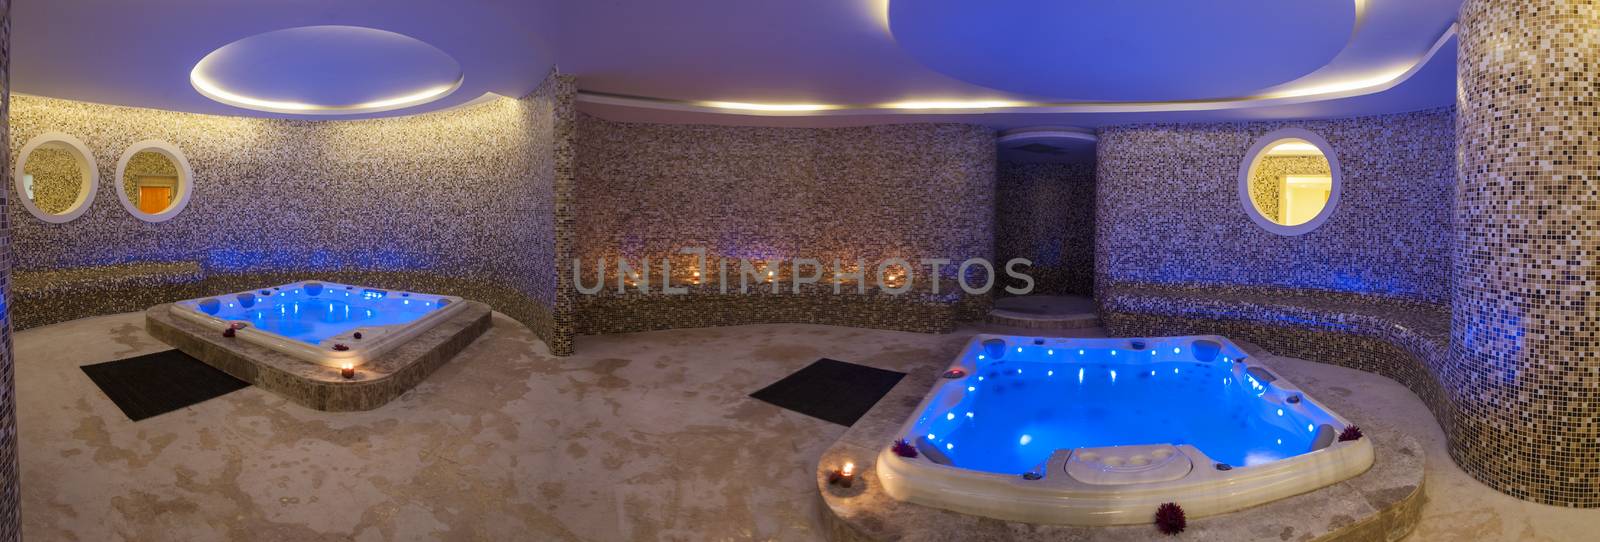 Panoramic view of wet area in a luxury health spa with two large jacuzzi